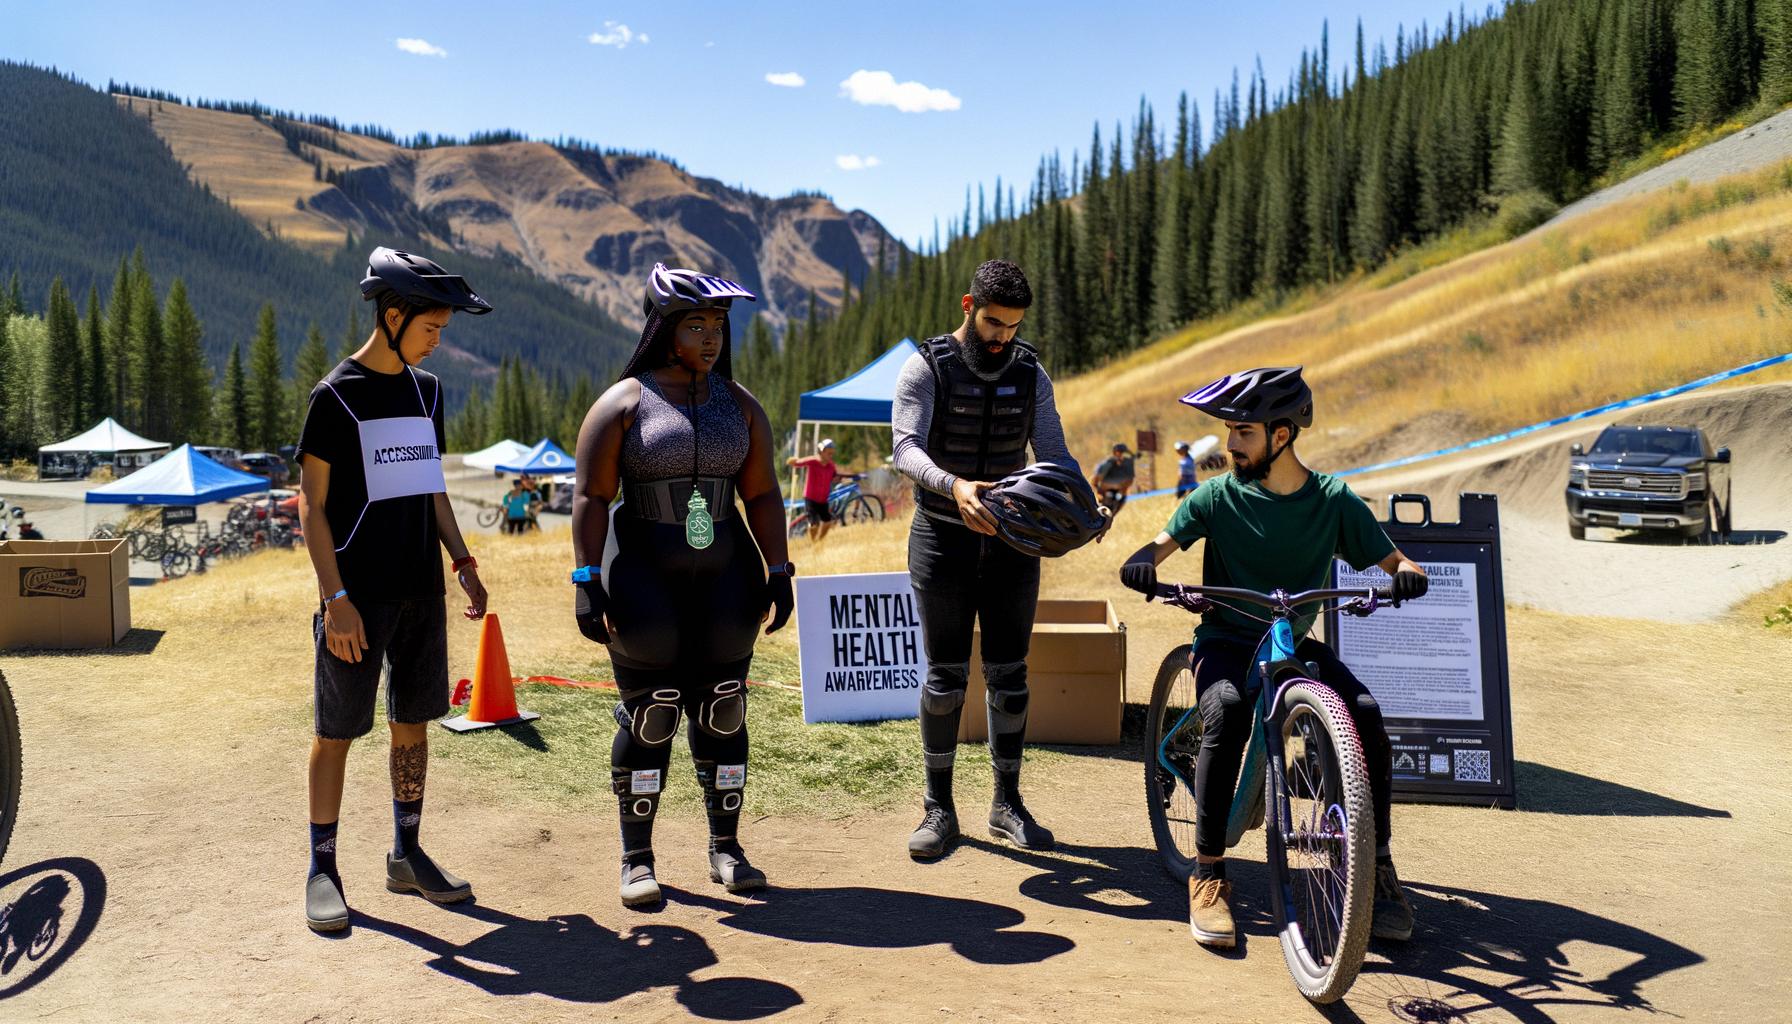 Mountain biking community focuses on mental health, accessibility, and competition.